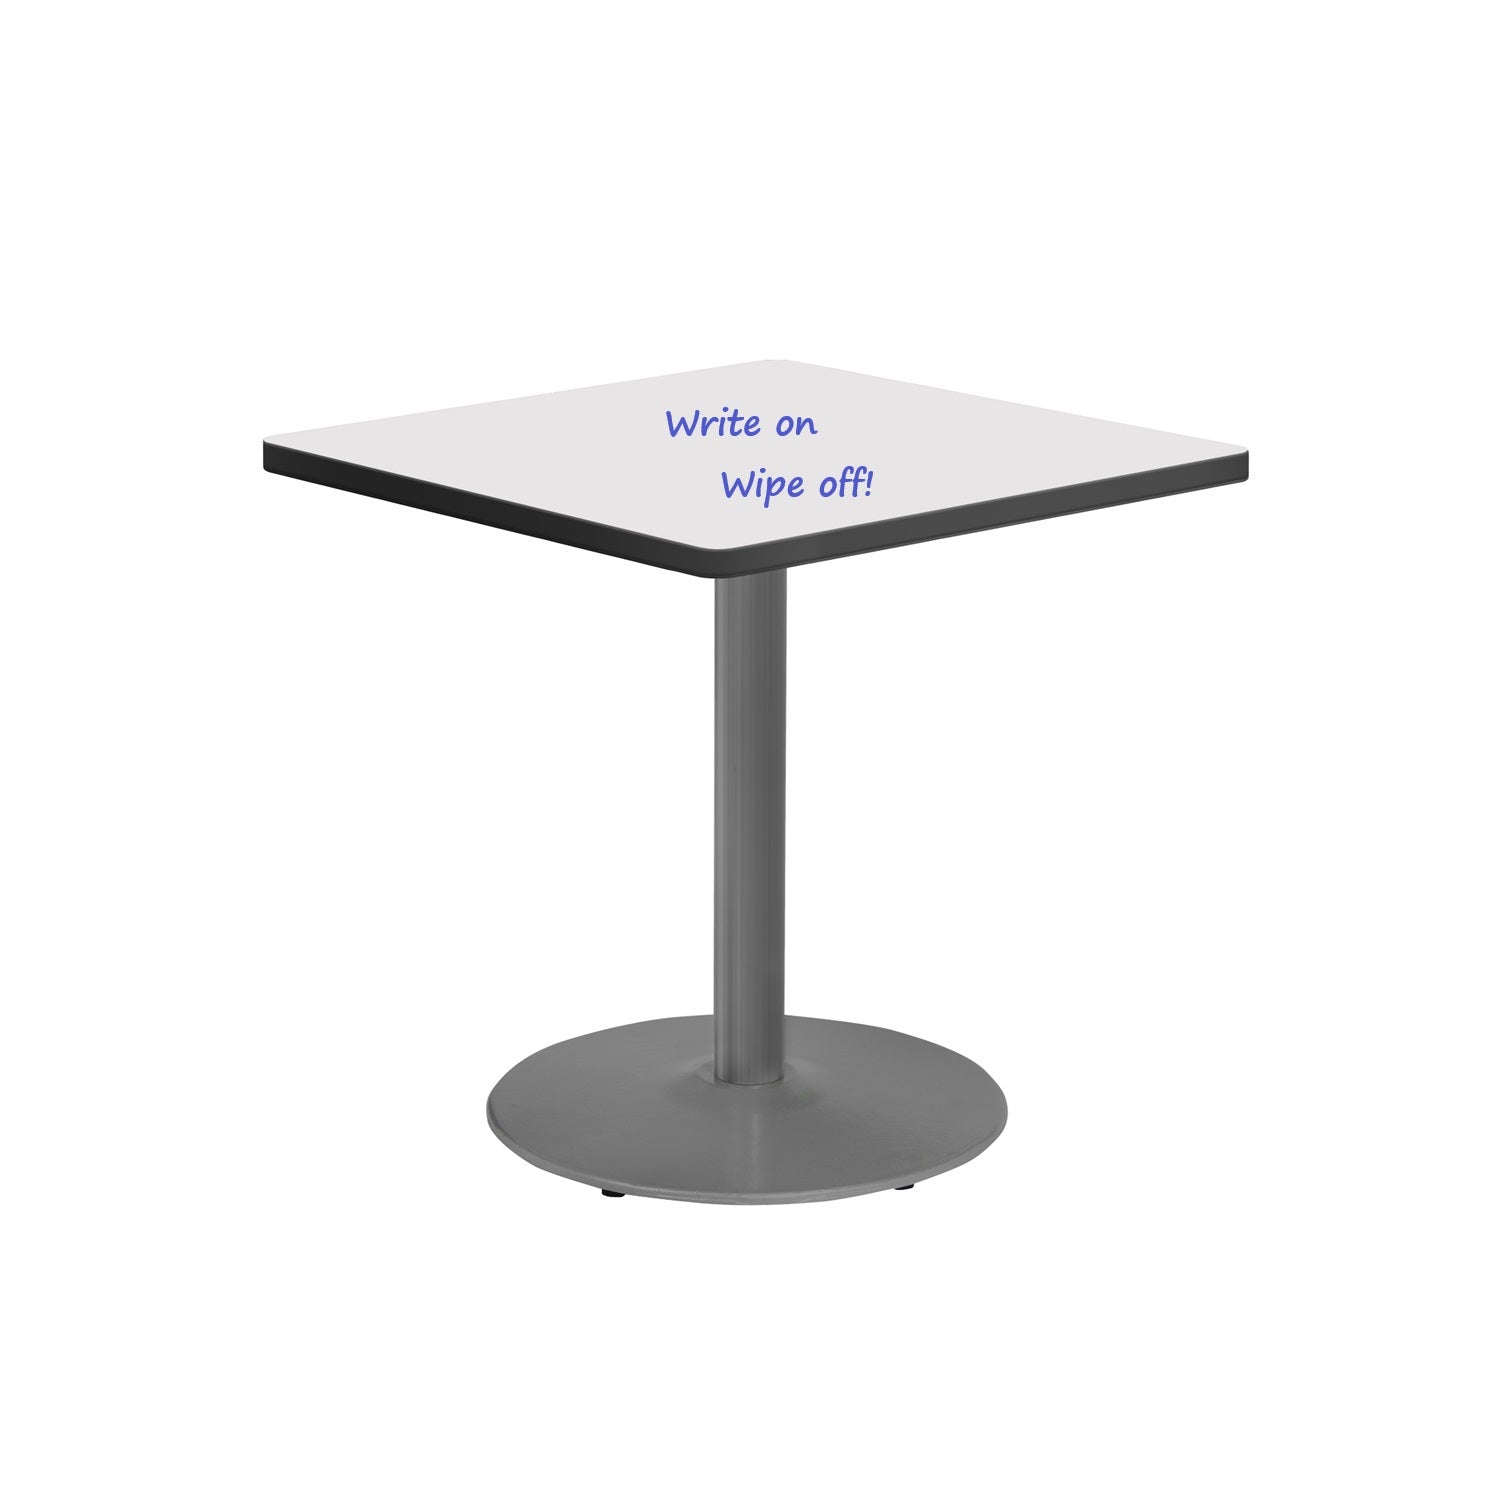 30" Square Sitting Height Café Table with Dry-Erase Whiteboard Top